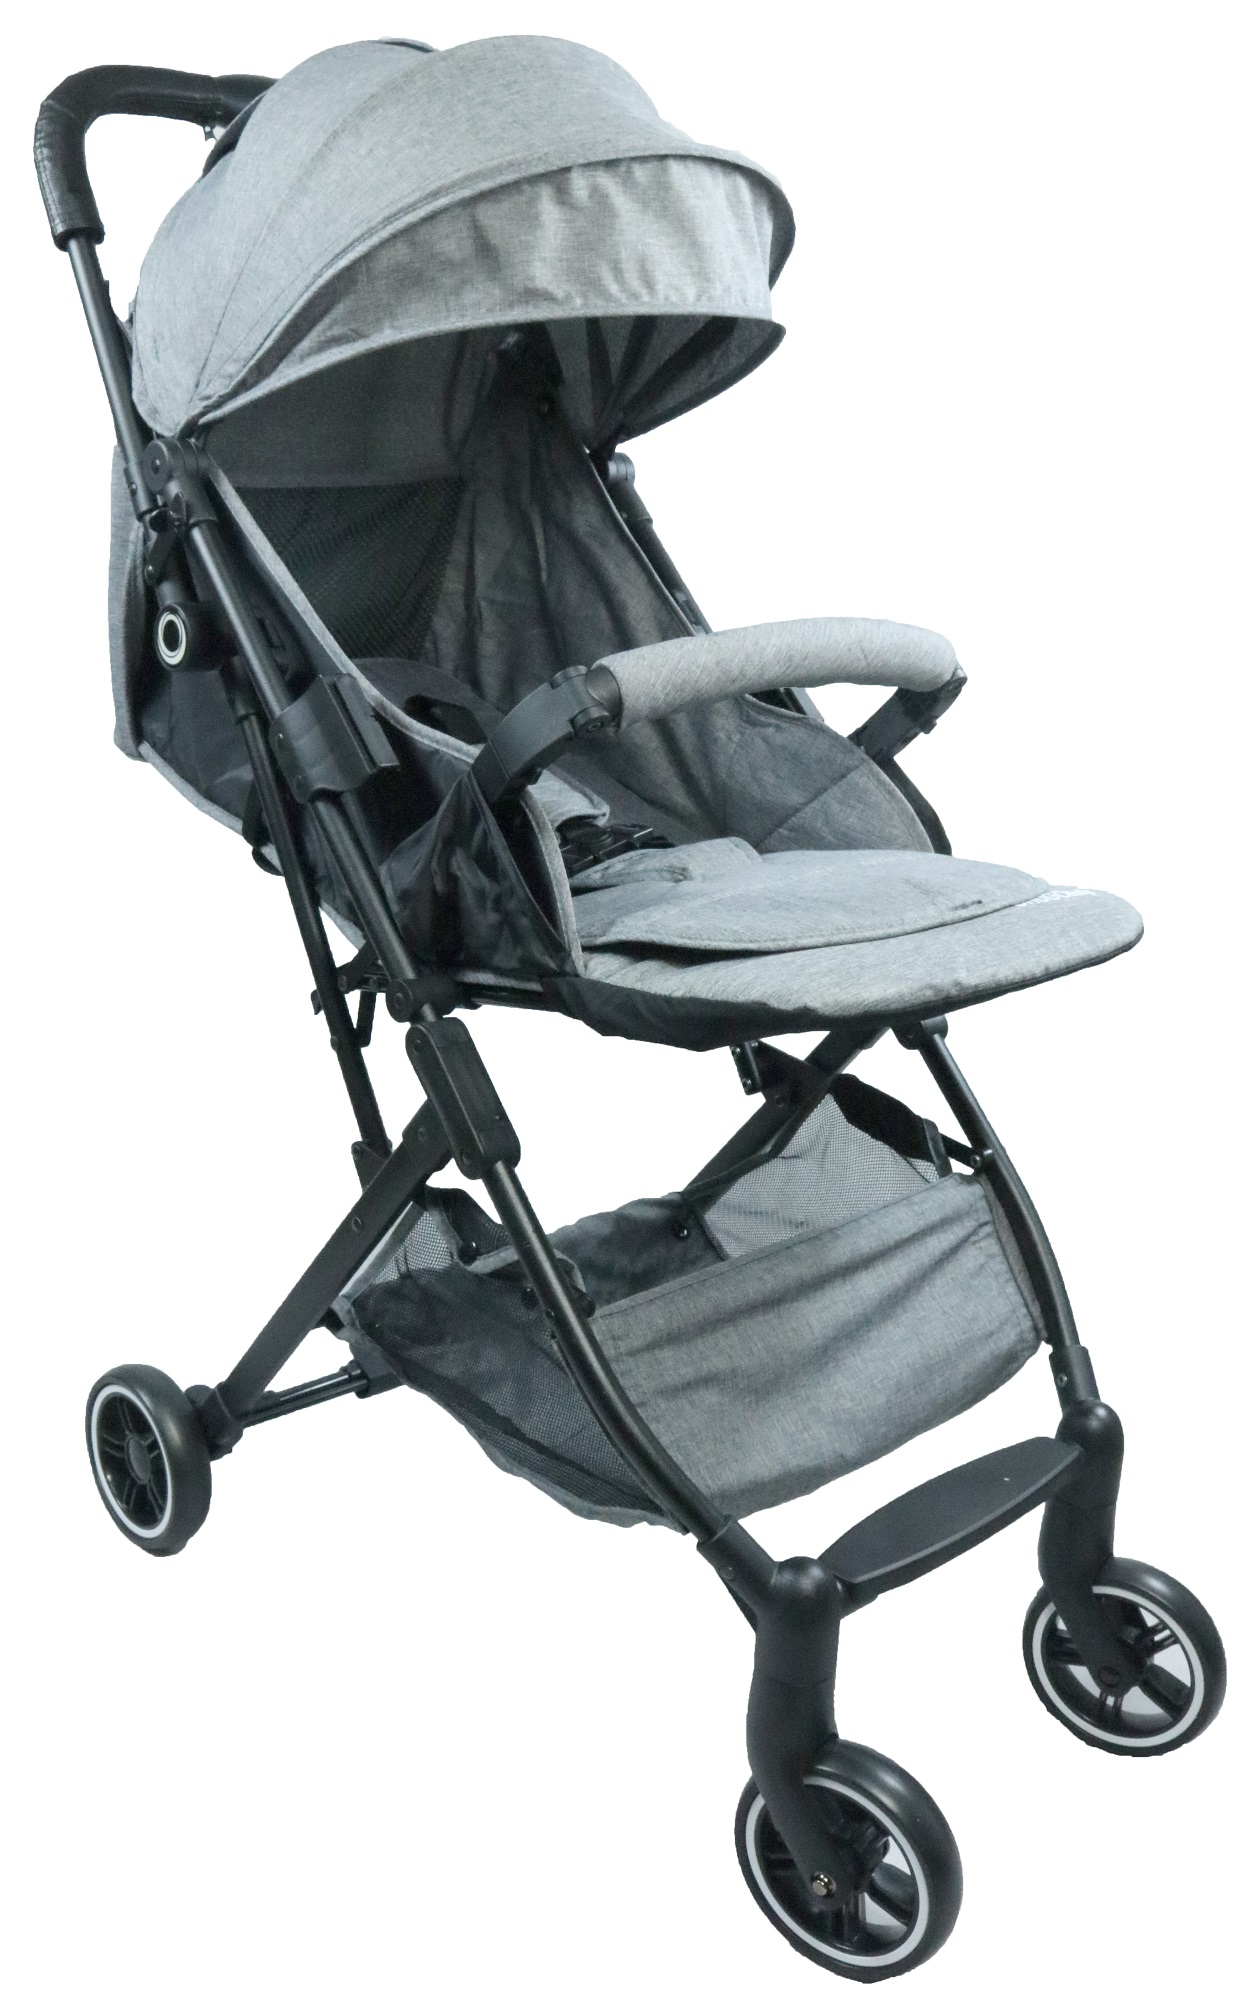 Hugo Baby Volare Portable Stroller (Grey) with FREE PU Leather Handle Cover + Stroller Cover Bag (Exclusive) 